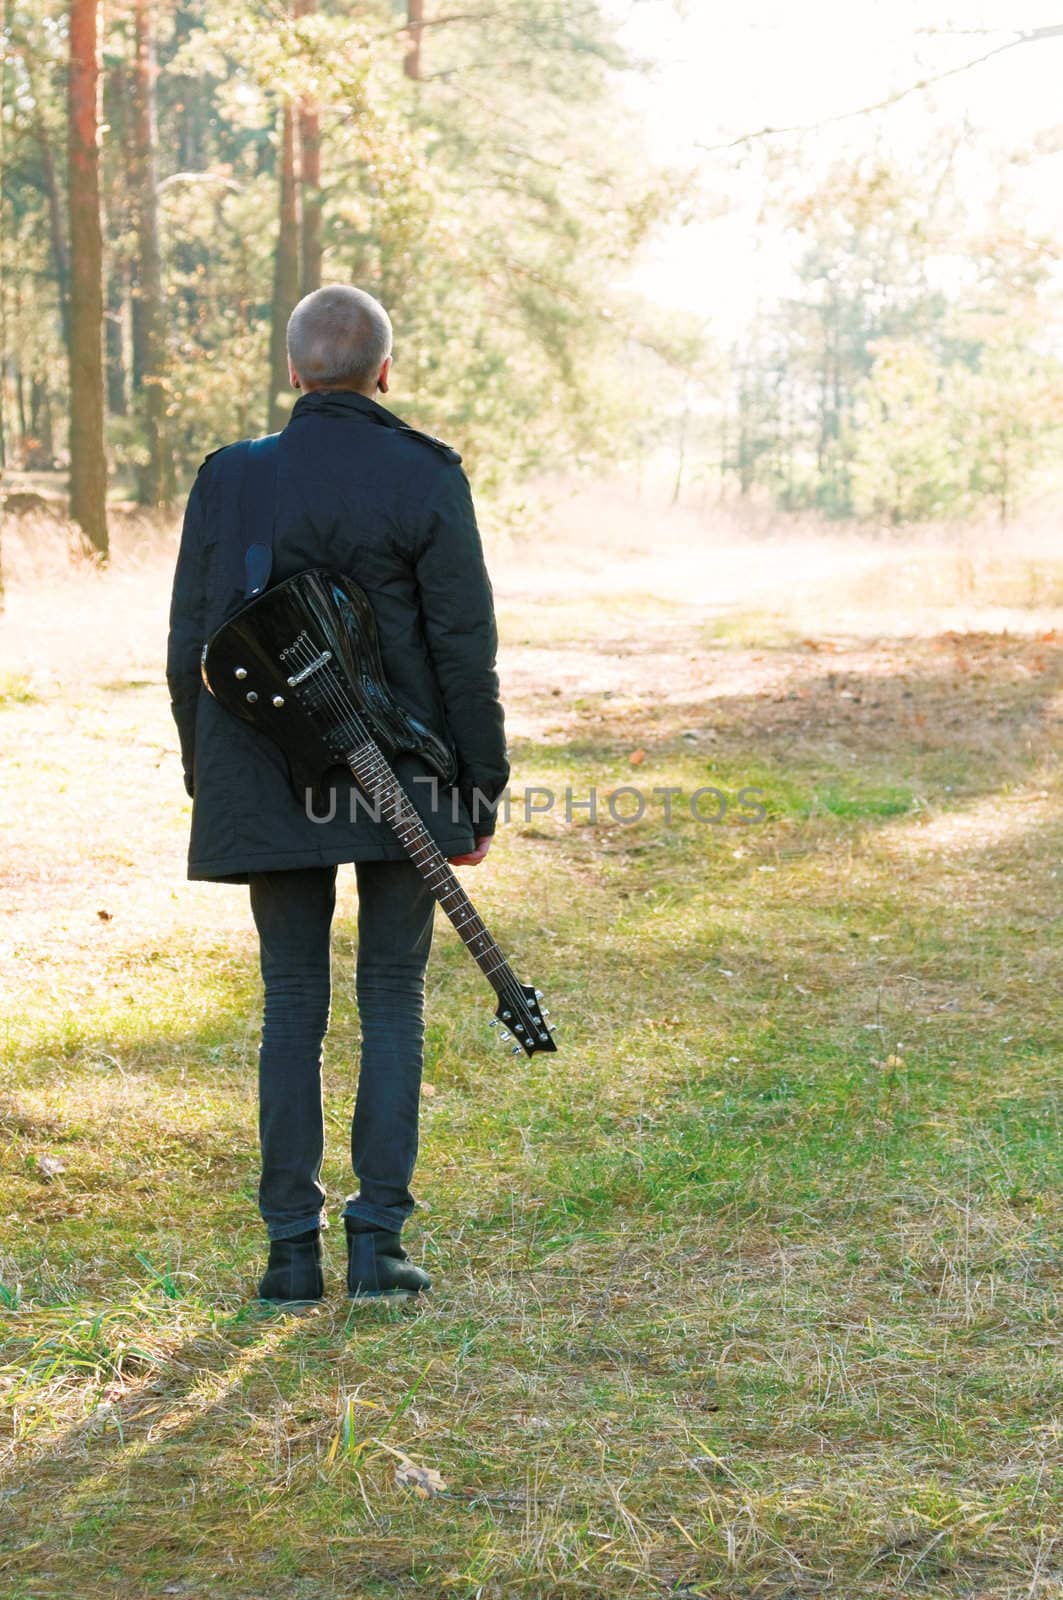 teen musician with a guitar in the autumn forest